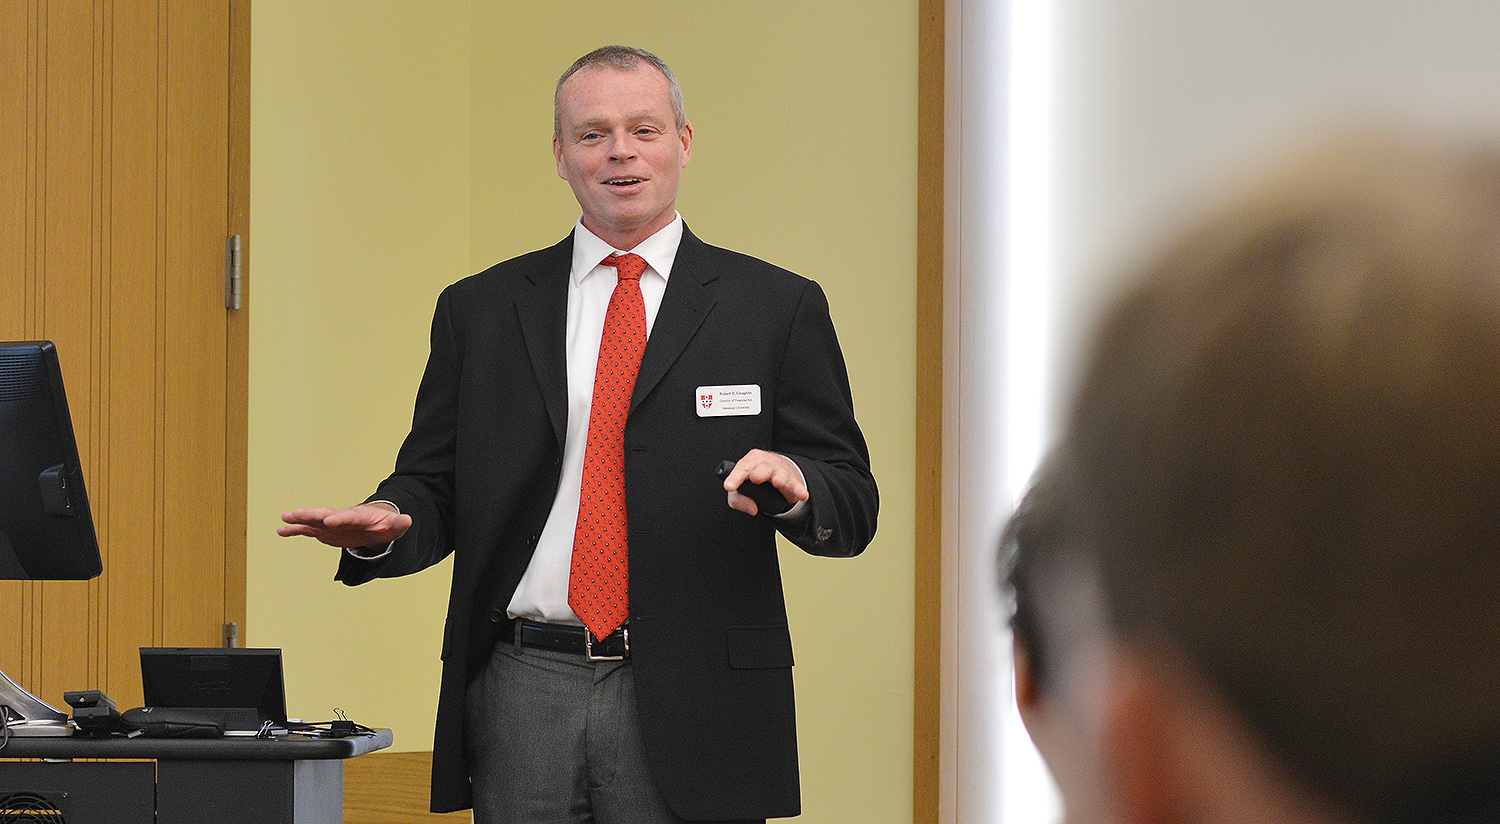 Robert Coughlin, director of financial aid, spoke to families about obtaining financial aid at Wesleyan. 